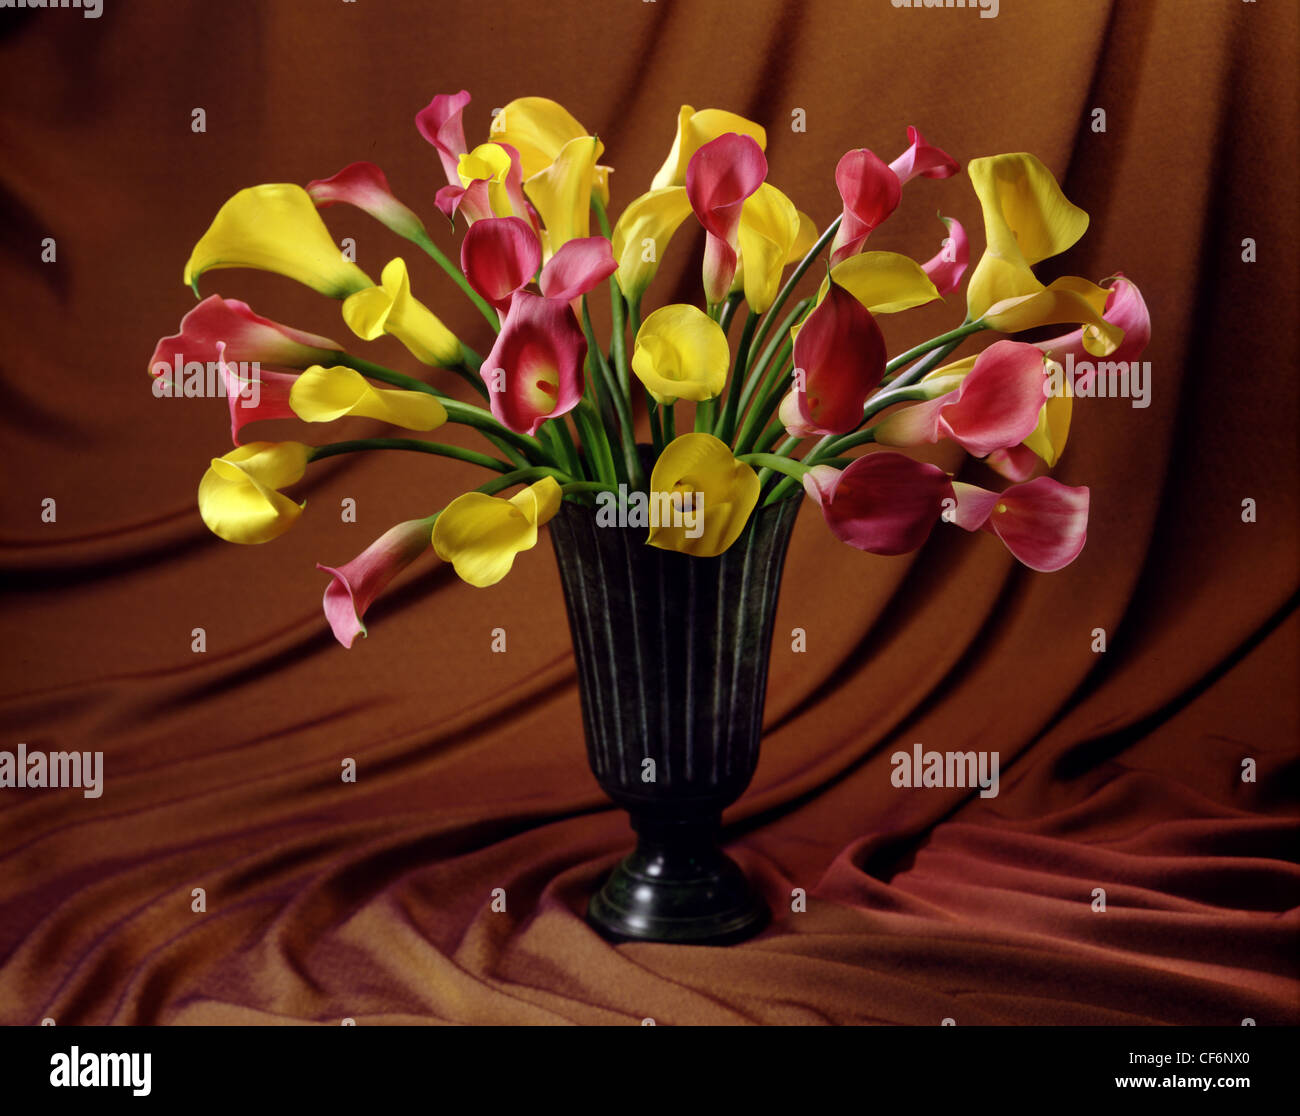 Yellow and Mauve Arum Lilies in green vase sitting on a draped brown material.  Horizontal color photograph Stock Photo